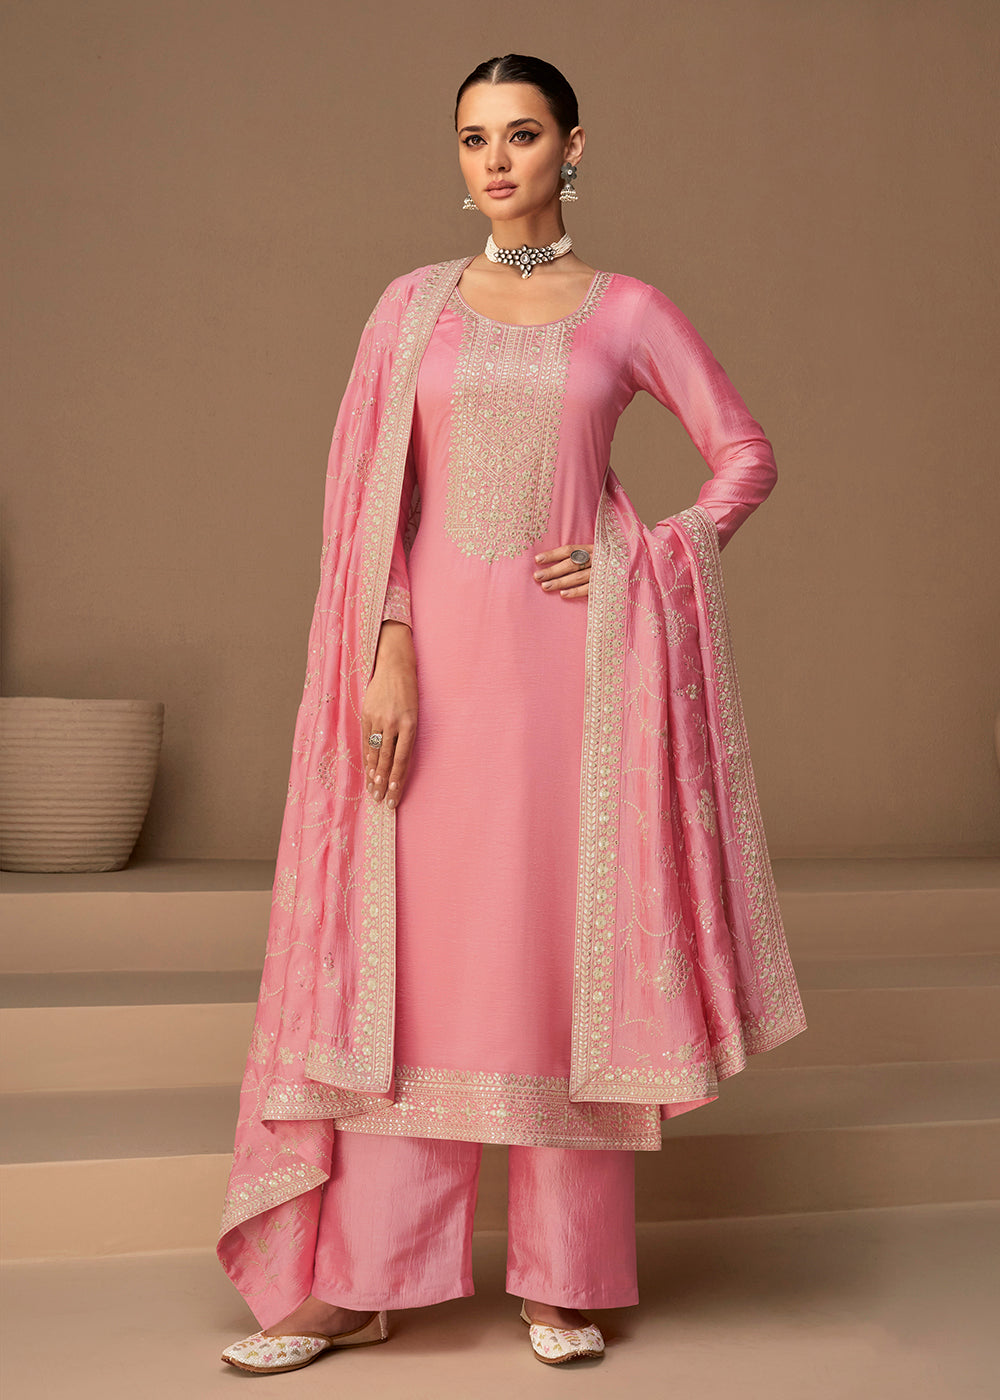 Buy Now Beautiful Rose Pink & Gold Embroidered Premium Silk Salwar Suit Online in USA, UK, Canada, Germany, Australia & Worldwide at Empress Clothing.